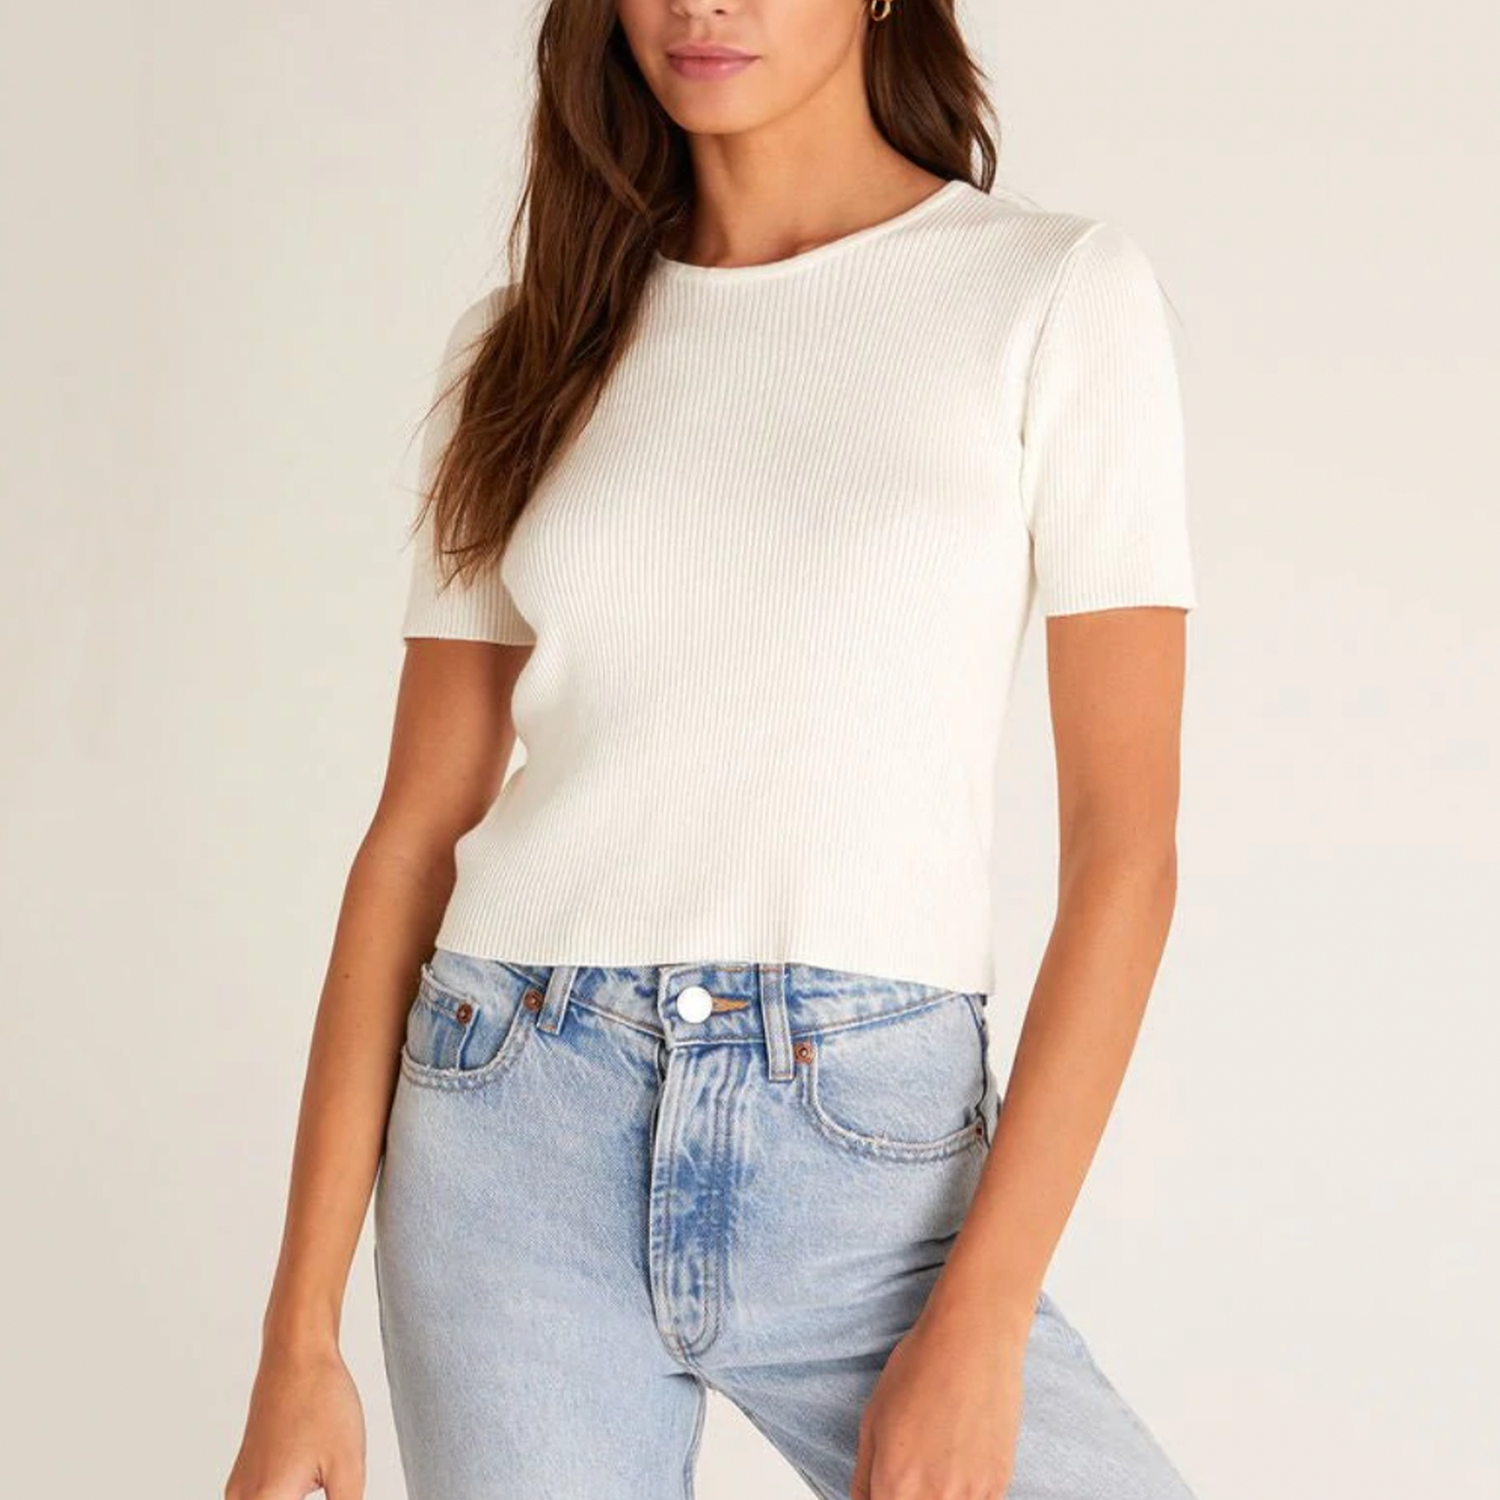 Z Supply Camilla Rib Sweater. This sweater tee is a wardrobe essential. Z Supply's Camilla Rib Sweater Tee goes with everything, and is perfectly cropped with a high neckline and short sleeves. Pair this tee with a pair of relaxed denim for a chic look